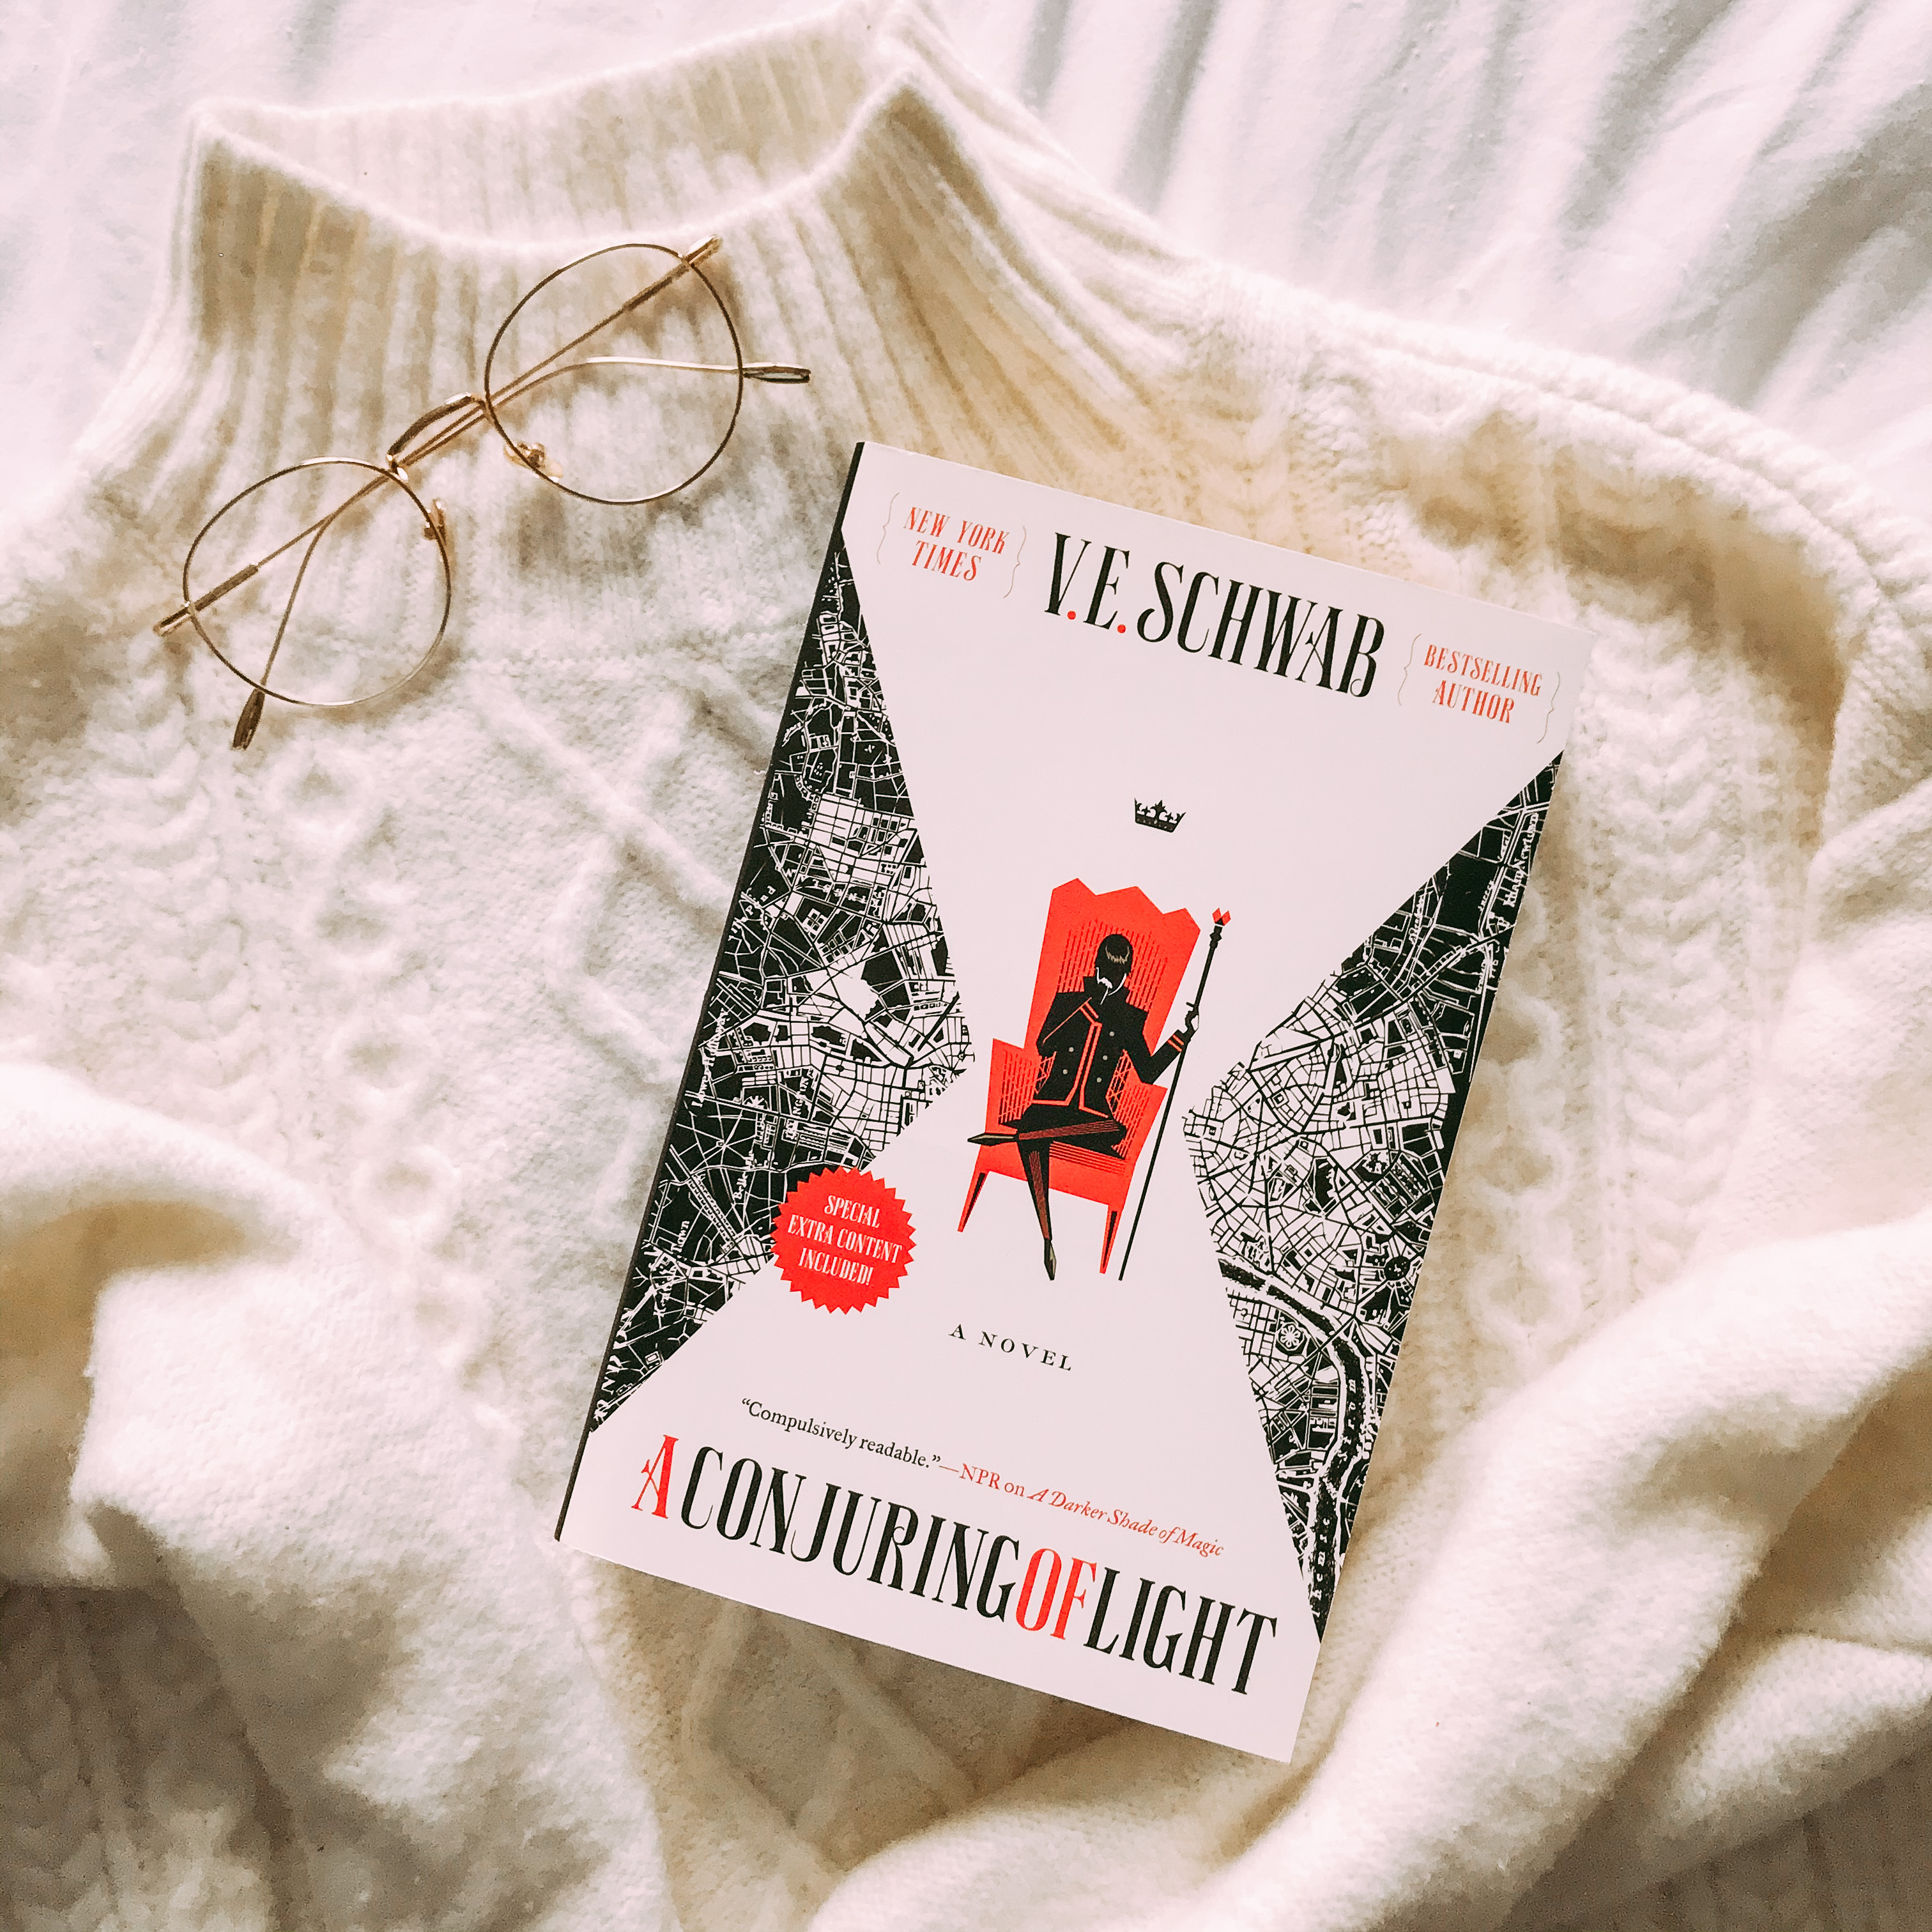 a conjuring of light book by ve schwab with a white turtleneck sweater and gold rimmed glasses